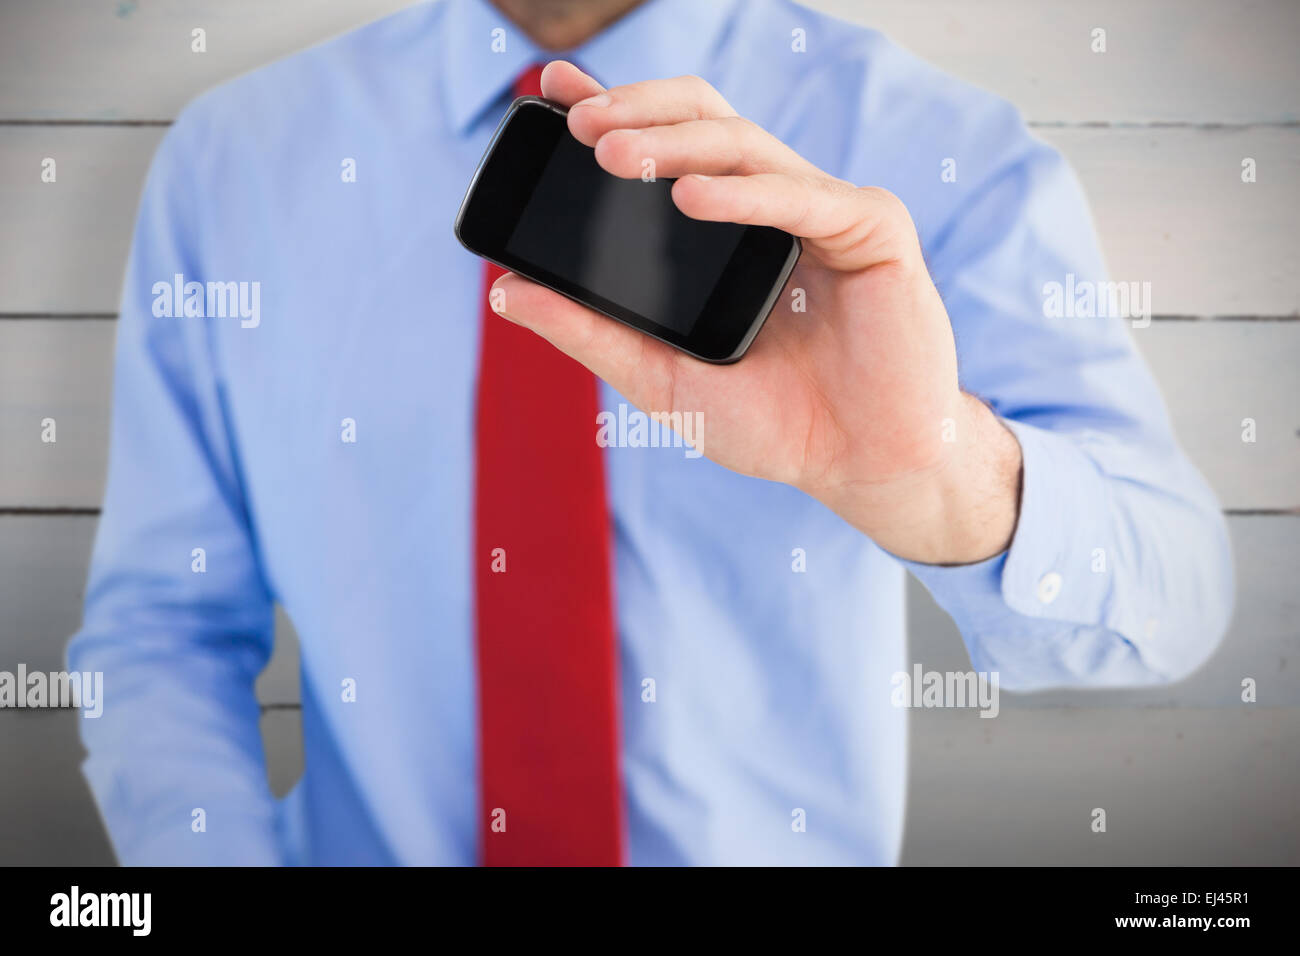 Composite image of hand of businessman showing smartphone Stock Photo